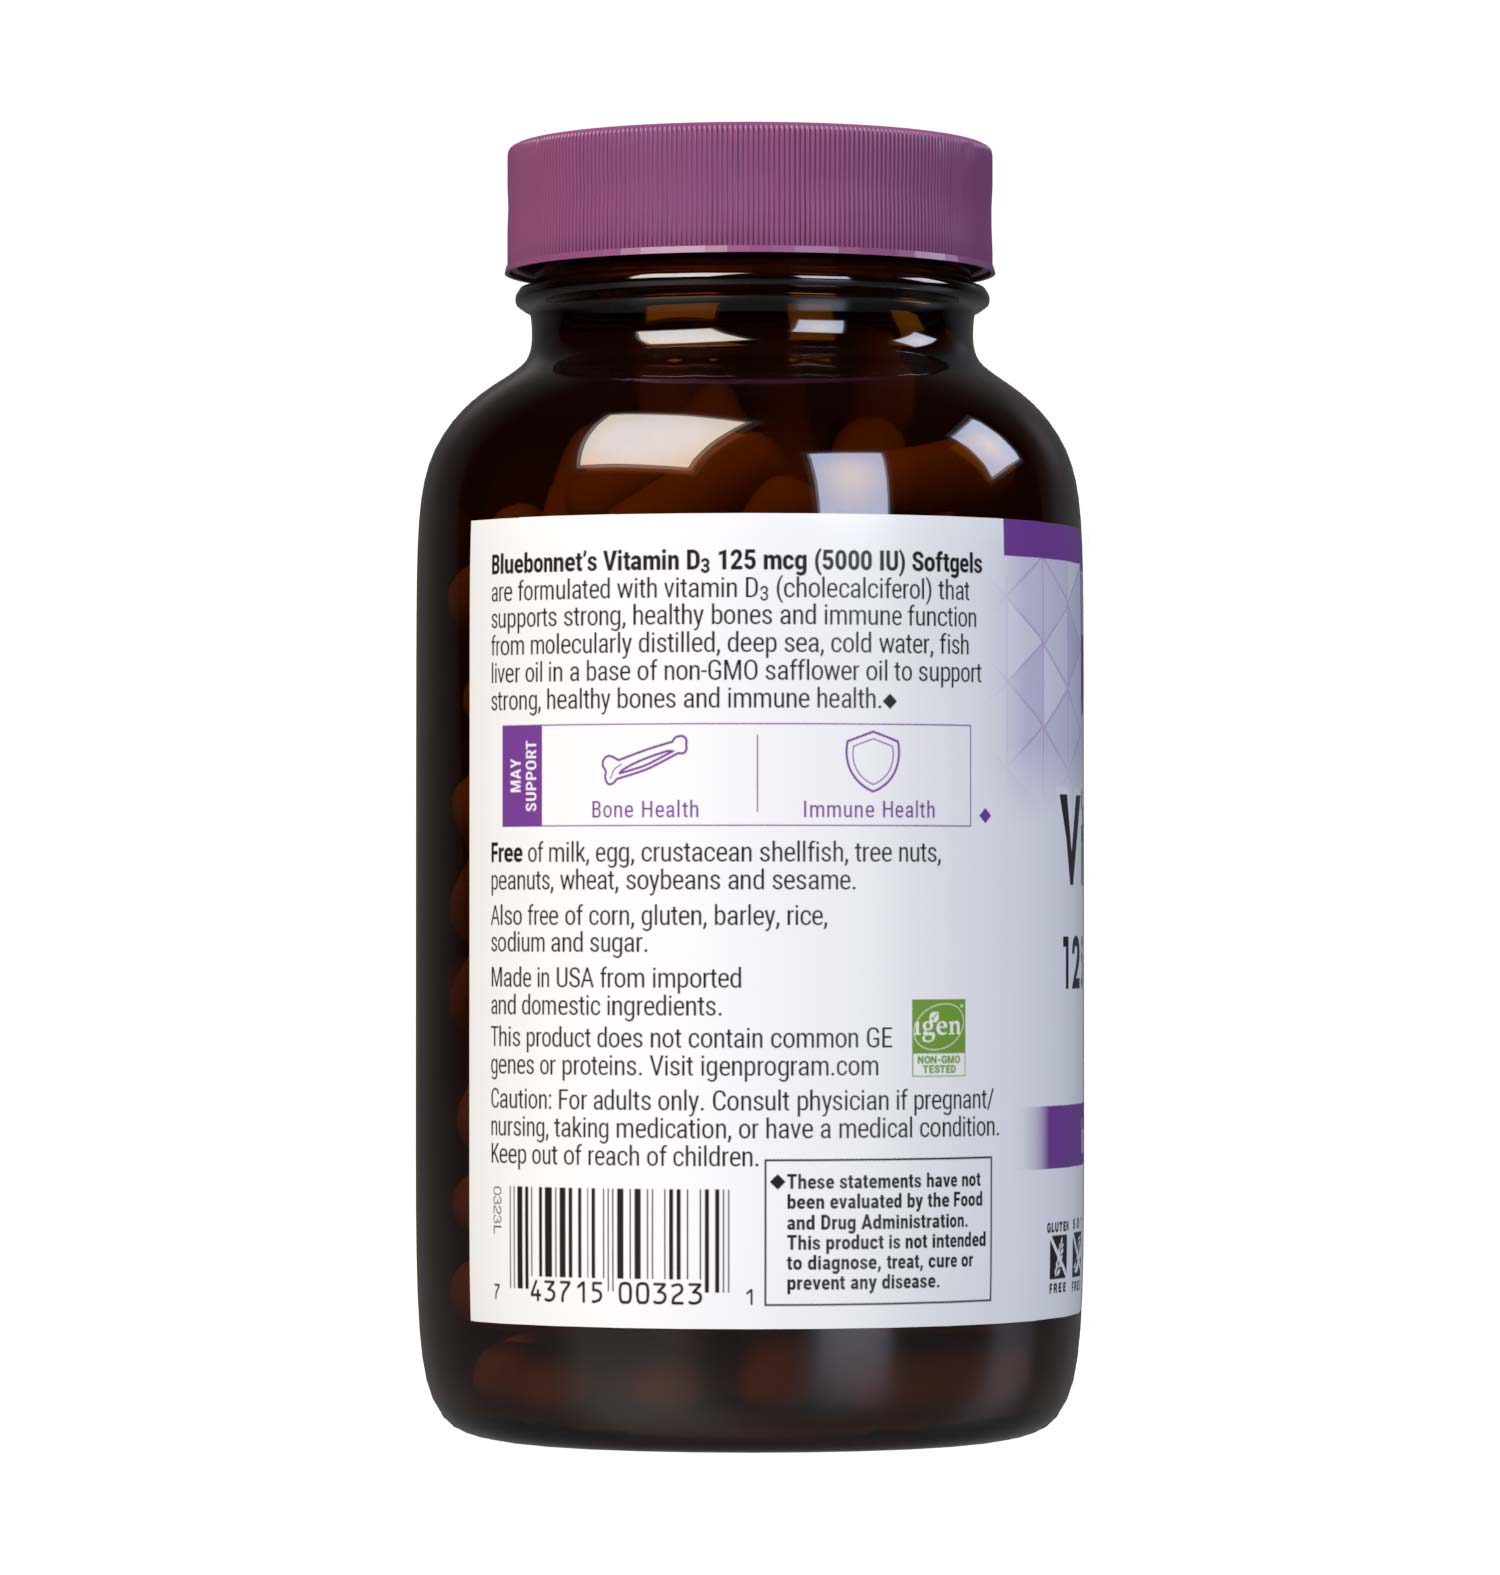 Bluebonnet’s Vitamin D3 125 mcg (5000 IU) 250 Softgels are formulated with vitamin D3 (cholecalciferol) that supports strong healthy bones and immune function from molecularly distilled, deep sea, cold water, fish liver oil in a base of non-GMO safflower oil. Description panel. #size_250 count